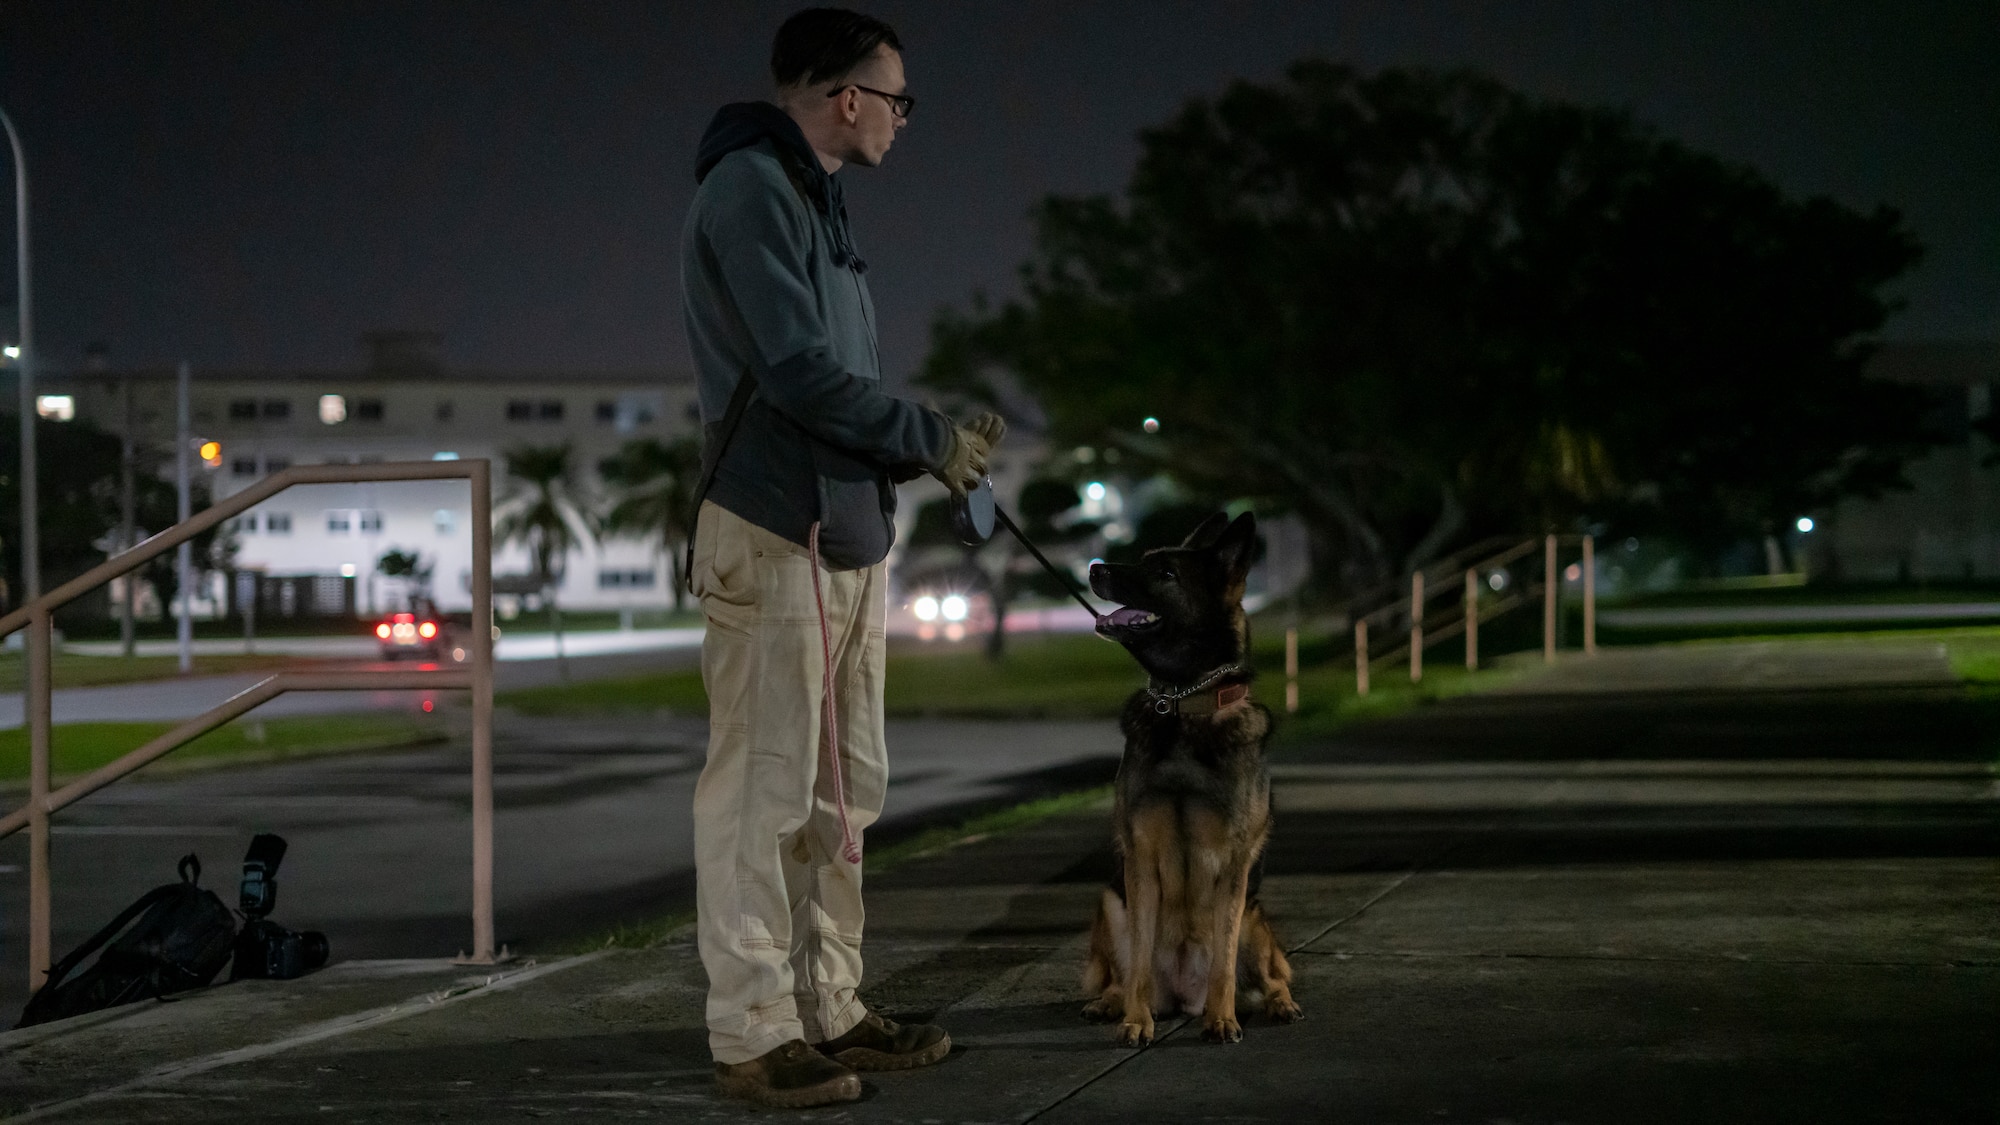 Military working dog trainer stands alongside his dog as they prepare to inspect a building for simulated explosives